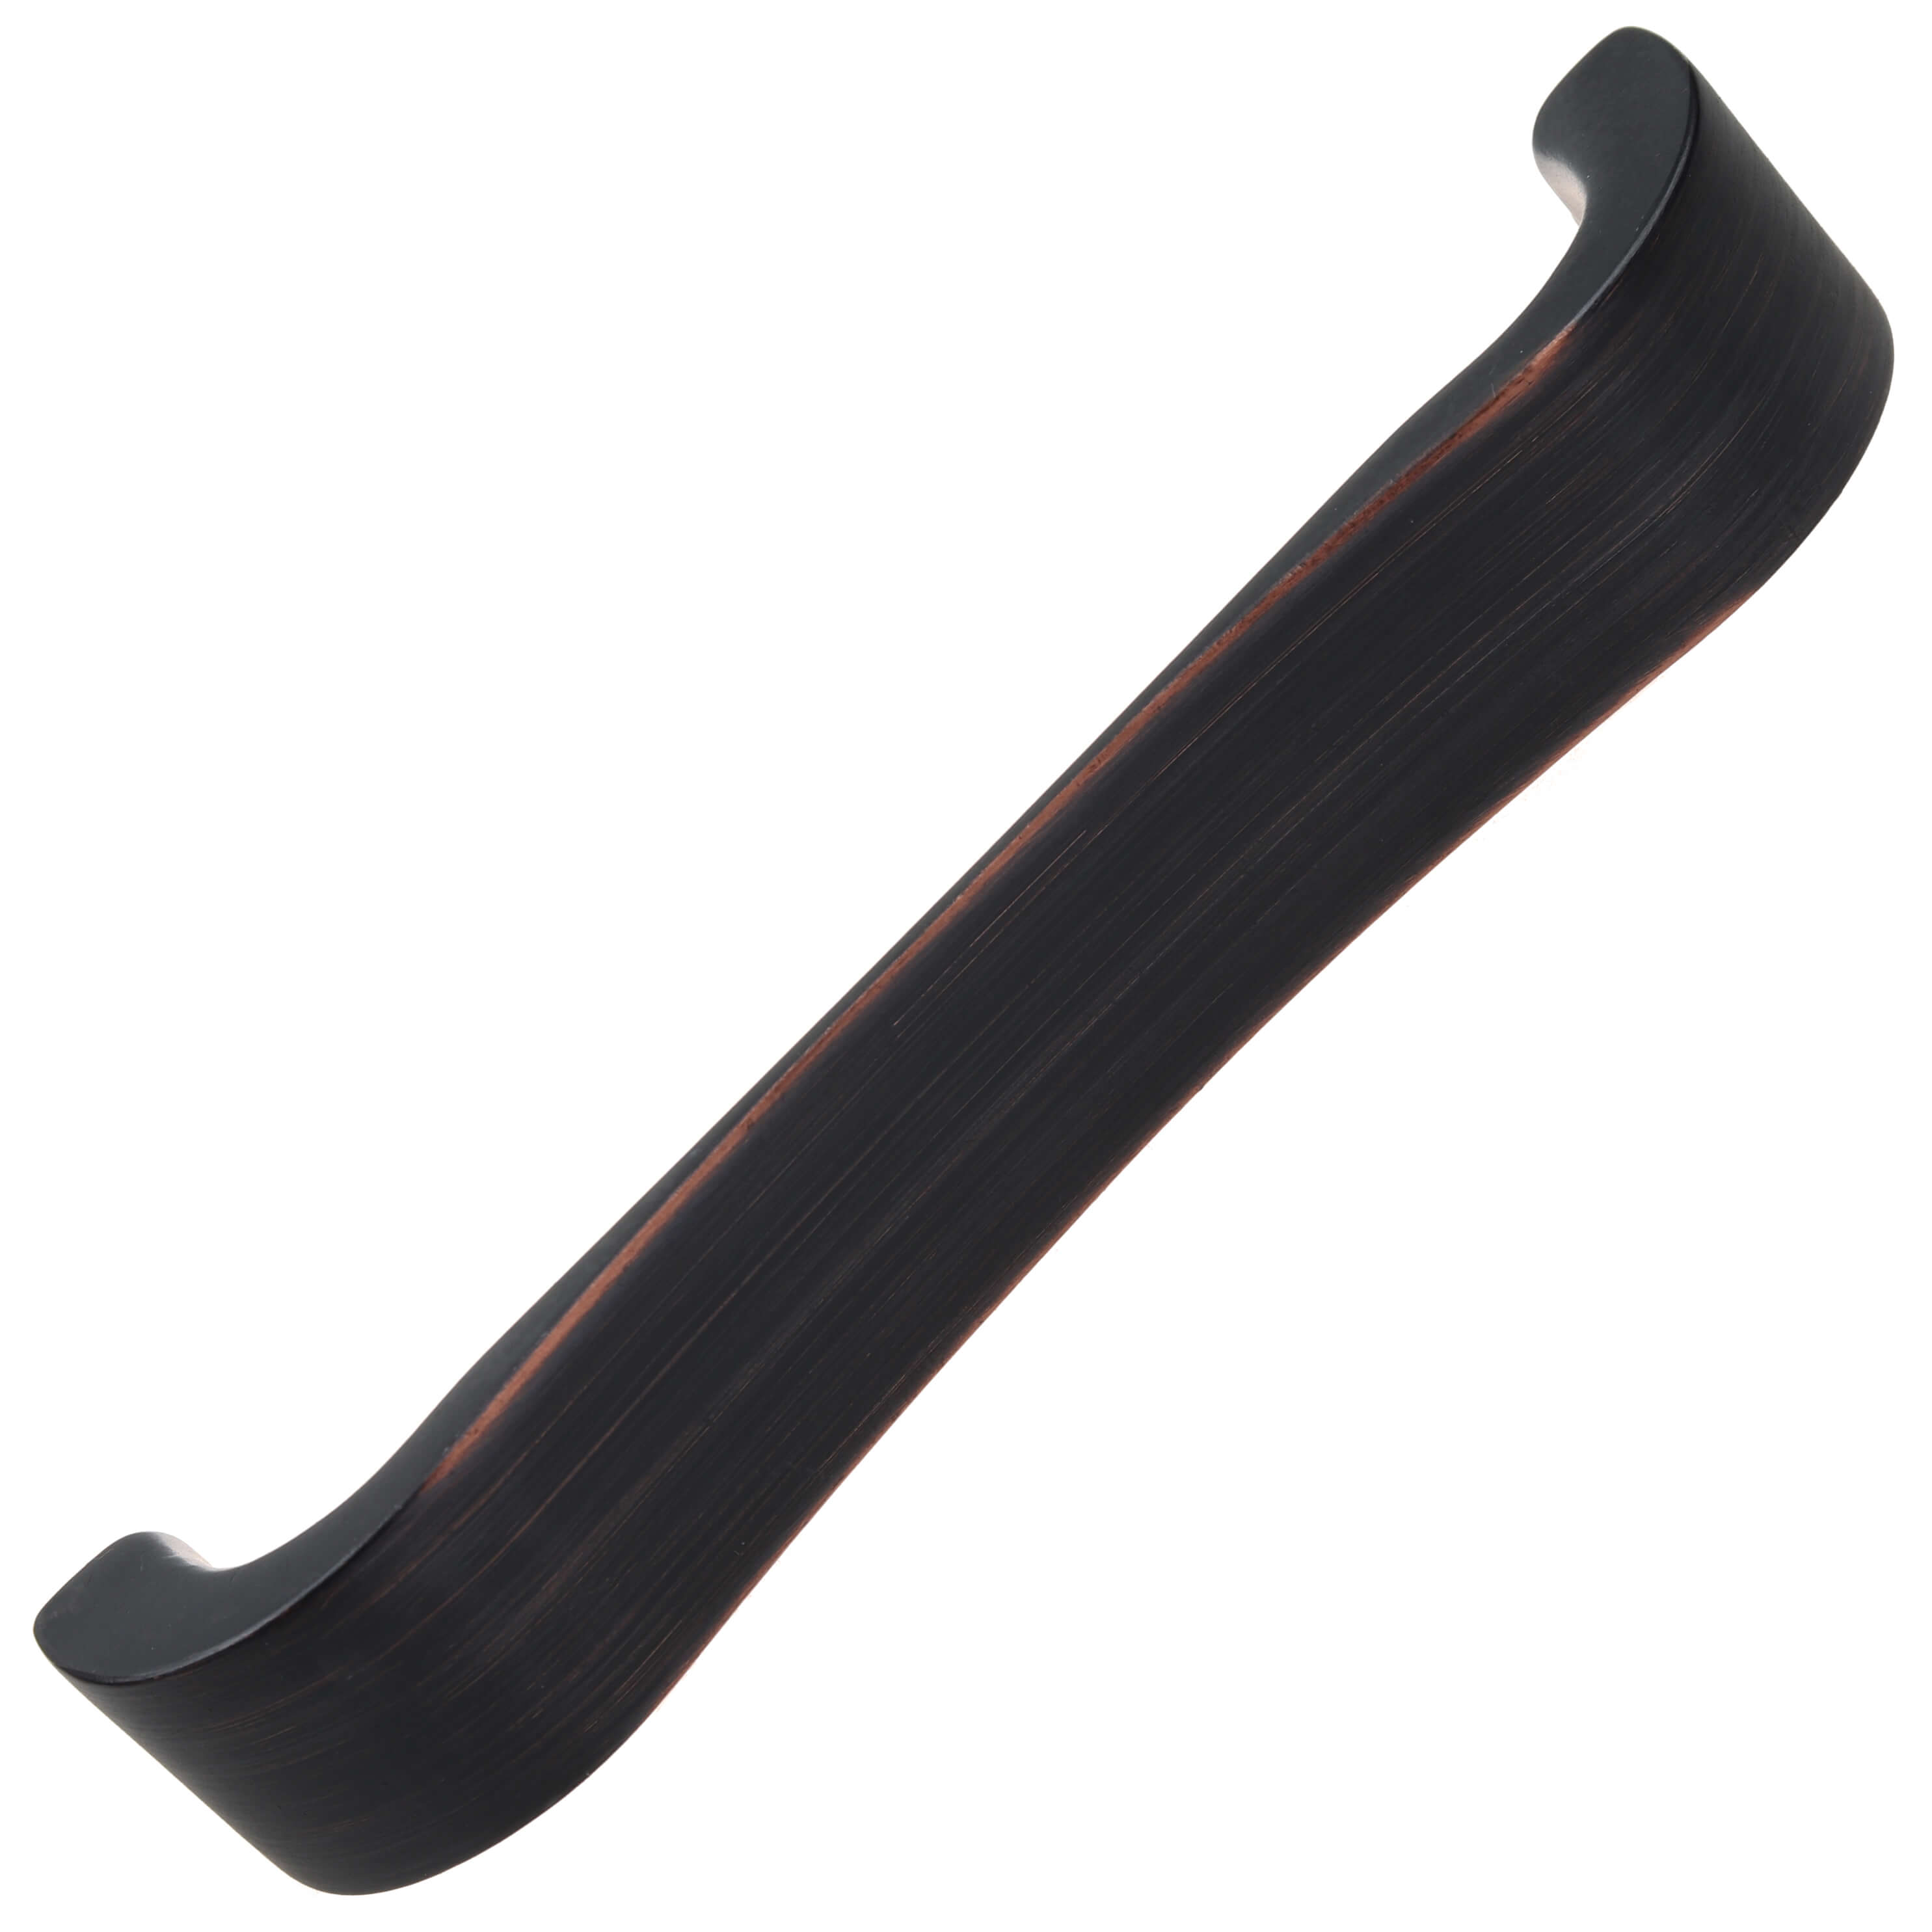 4-1/2 in. Center Smooth Curved Flat Cabinet Pull Handles, Oil Rubbed Bronze, Pack of 10 - image 1 of 3